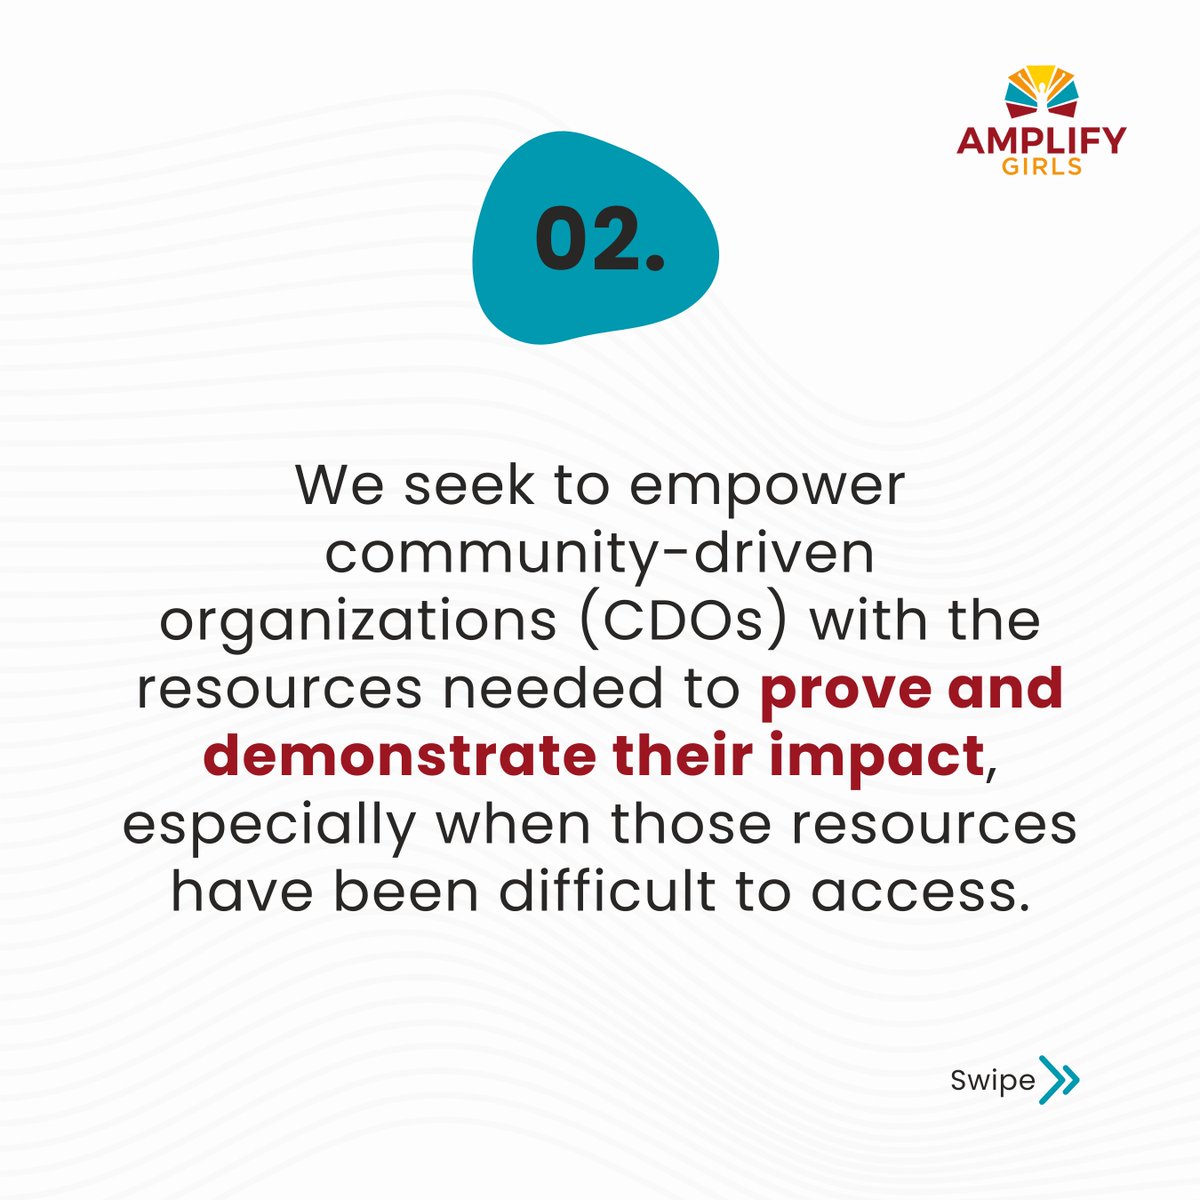 Here are 5 Reasons Why We Developed The Adolescent Girls Agency Survey: 1⃣ We seek to empower community-driven organizations (CDOs) with the resources needed to prove and demonstrate their impact, especially when those resources have been difficult to access. 1/5 #AMPLIFYHer